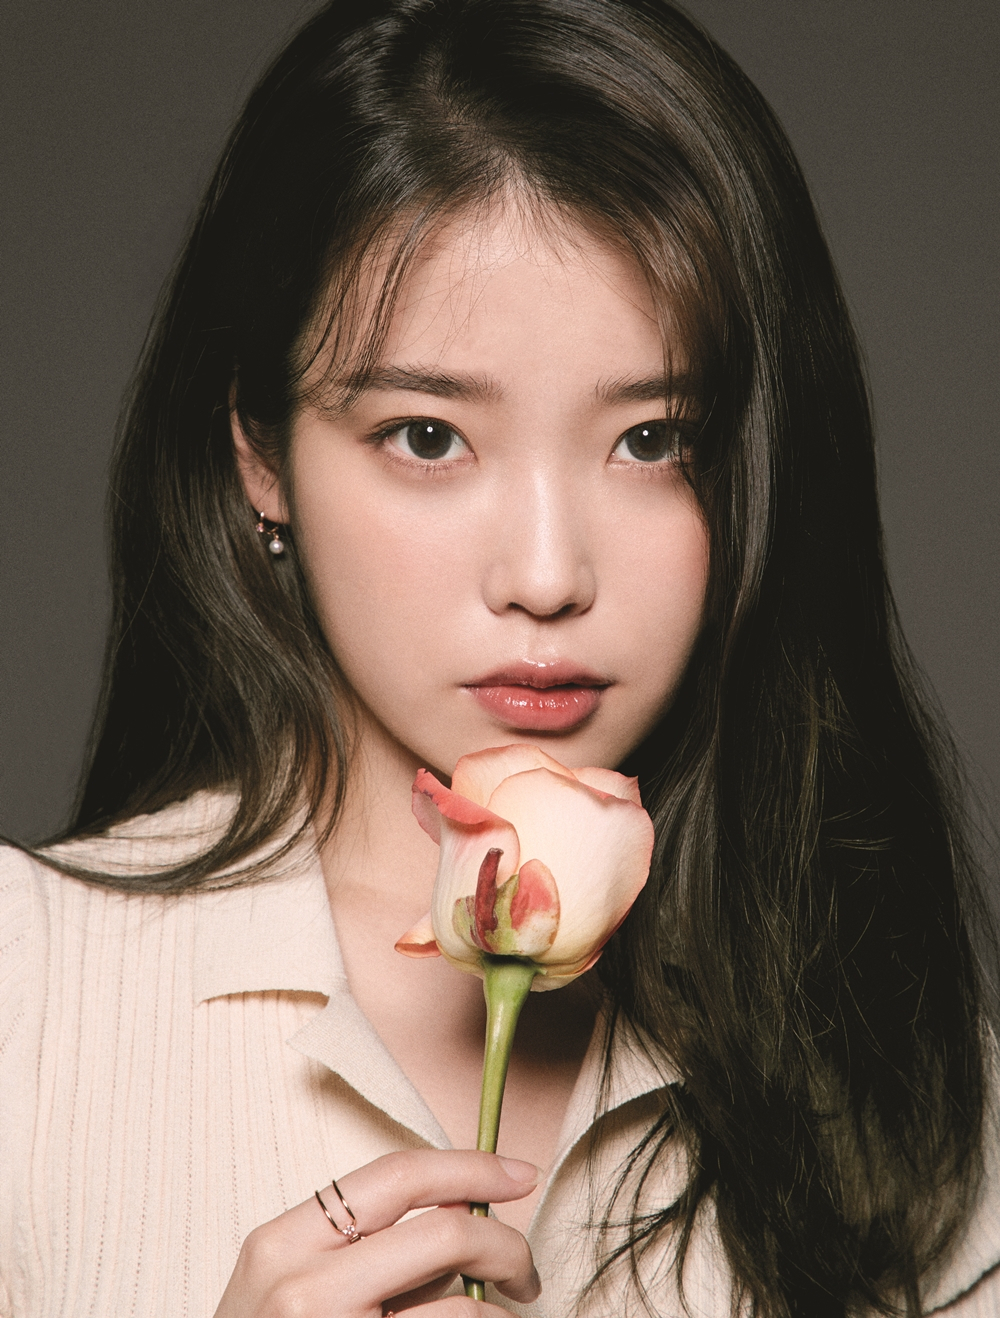 IU hit with plagiarism attacks, continues legal battle